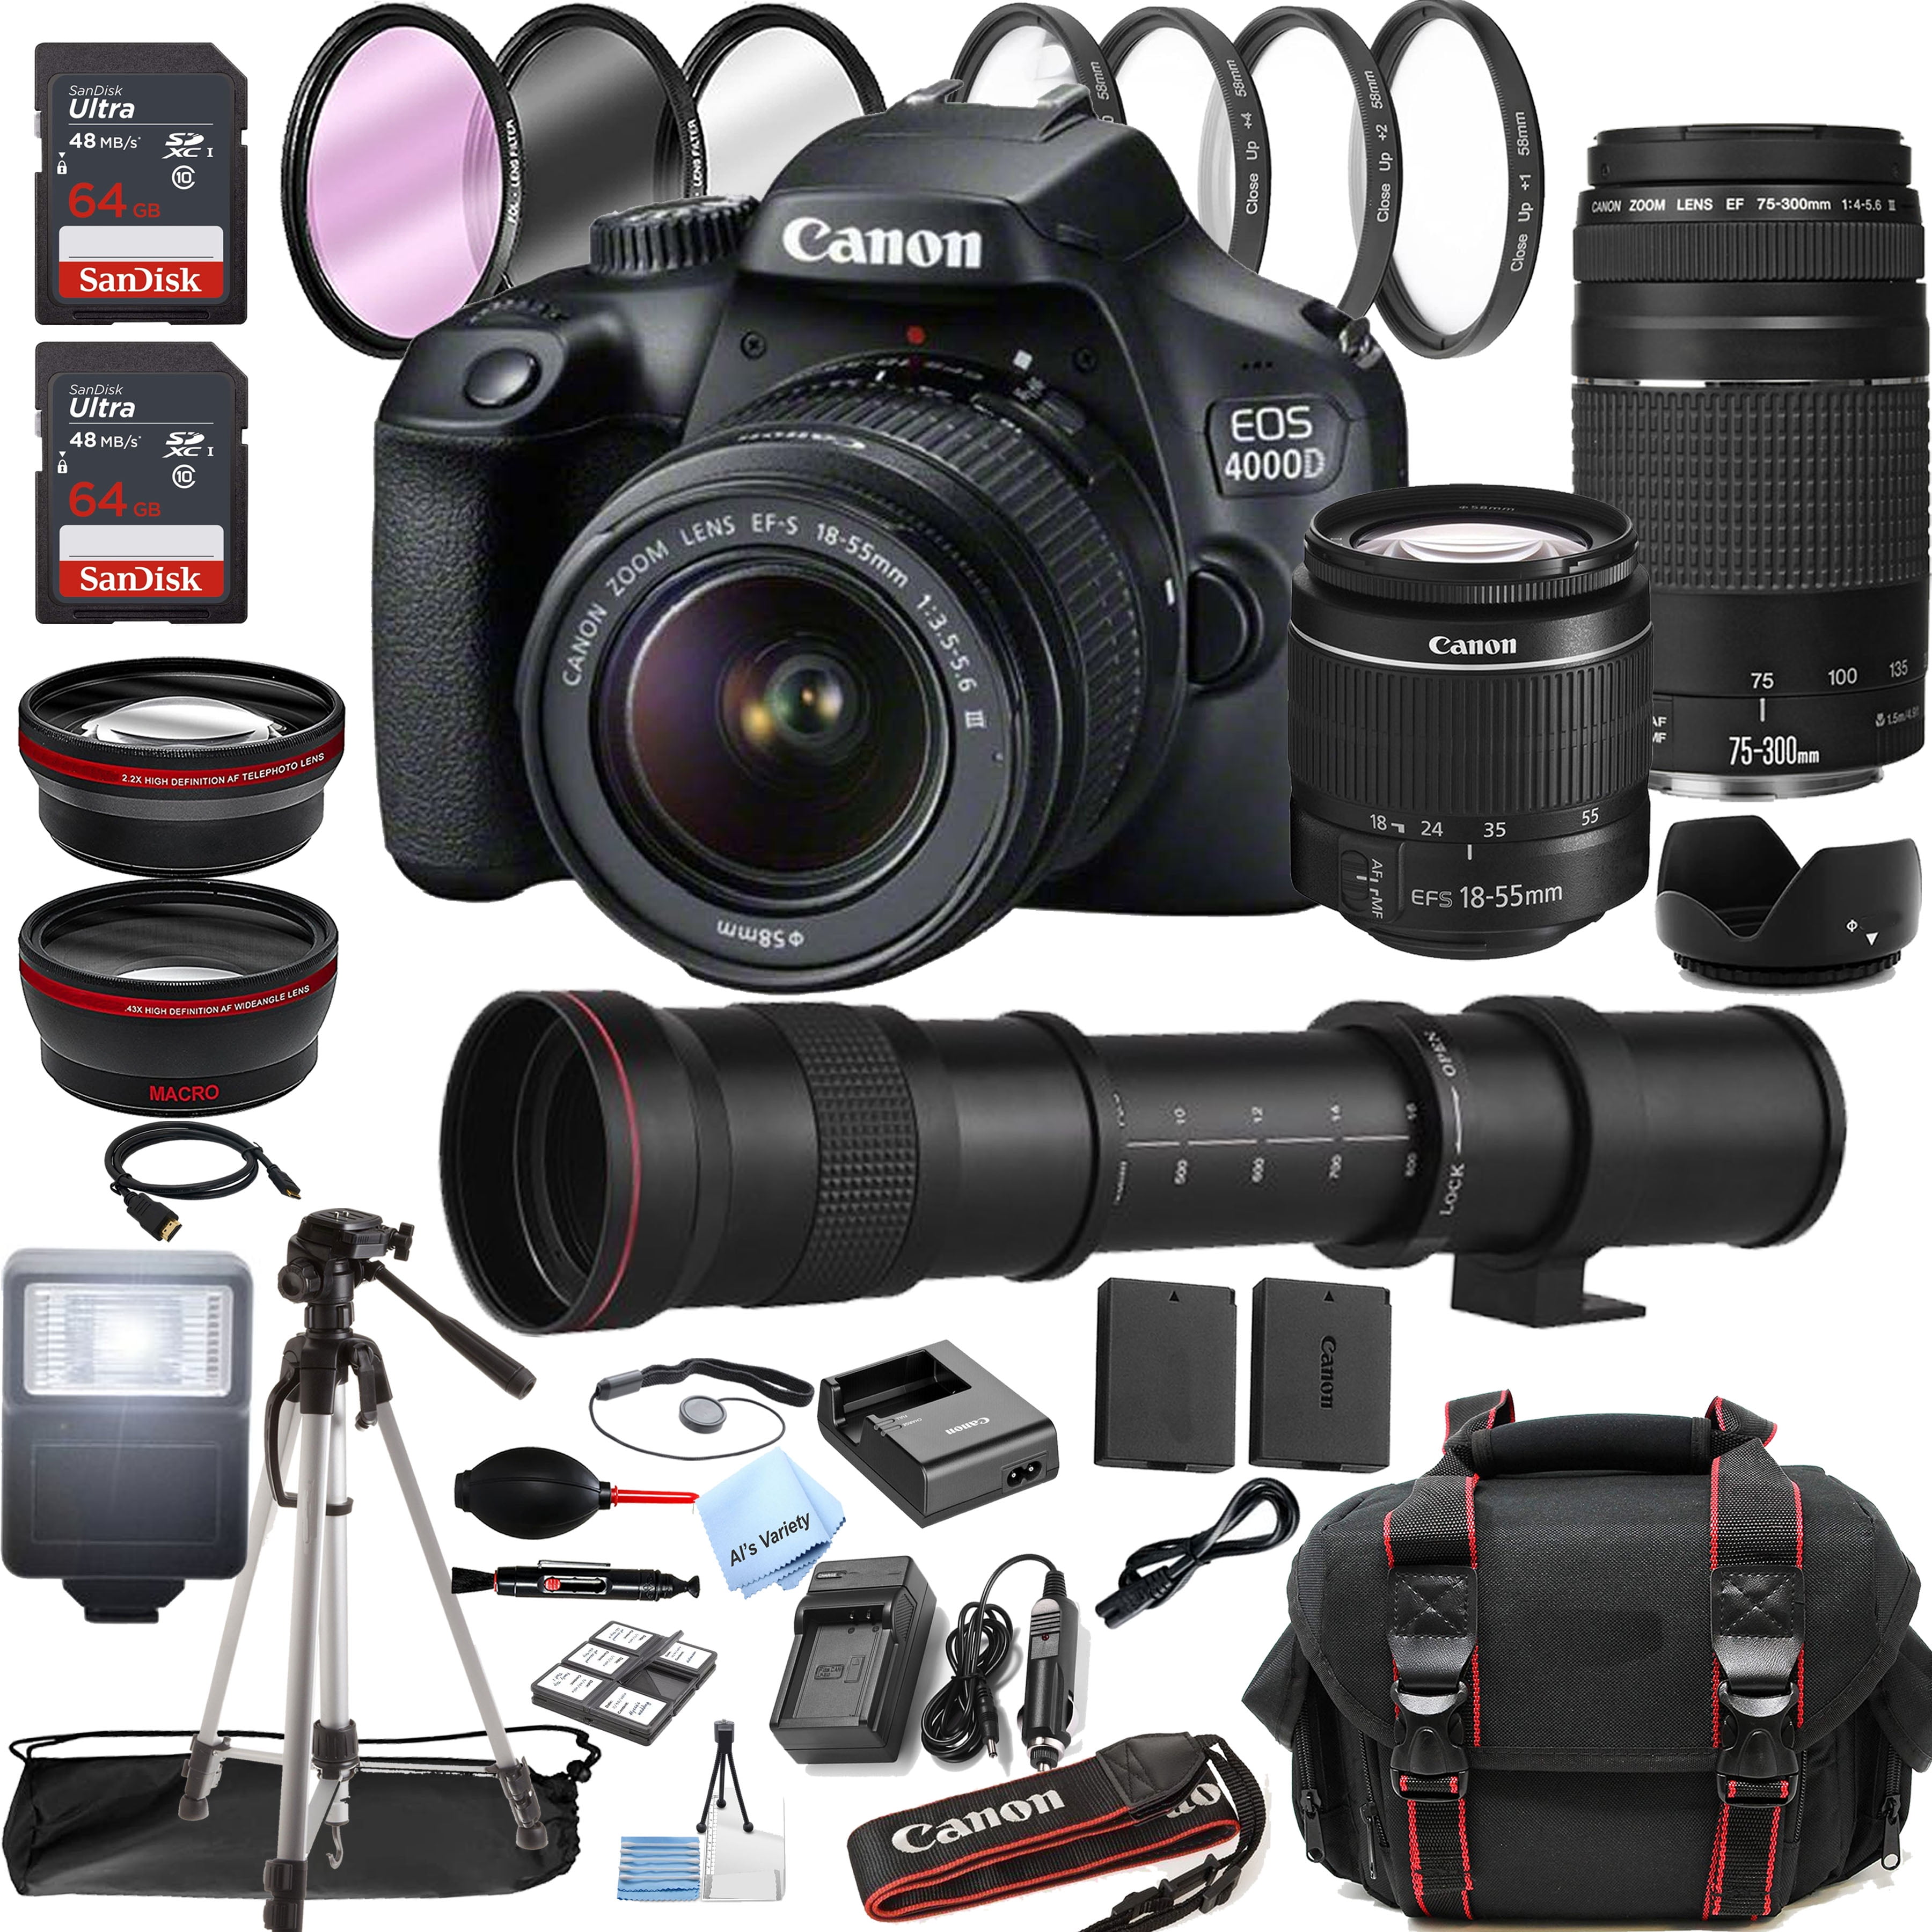 Canon EOS 4000D (Rebel T100) DSLR Camera Body Only (No Lens) with Basic  Starter Bundle; Includes: SanDisk Ultra 64GB SD Card and More